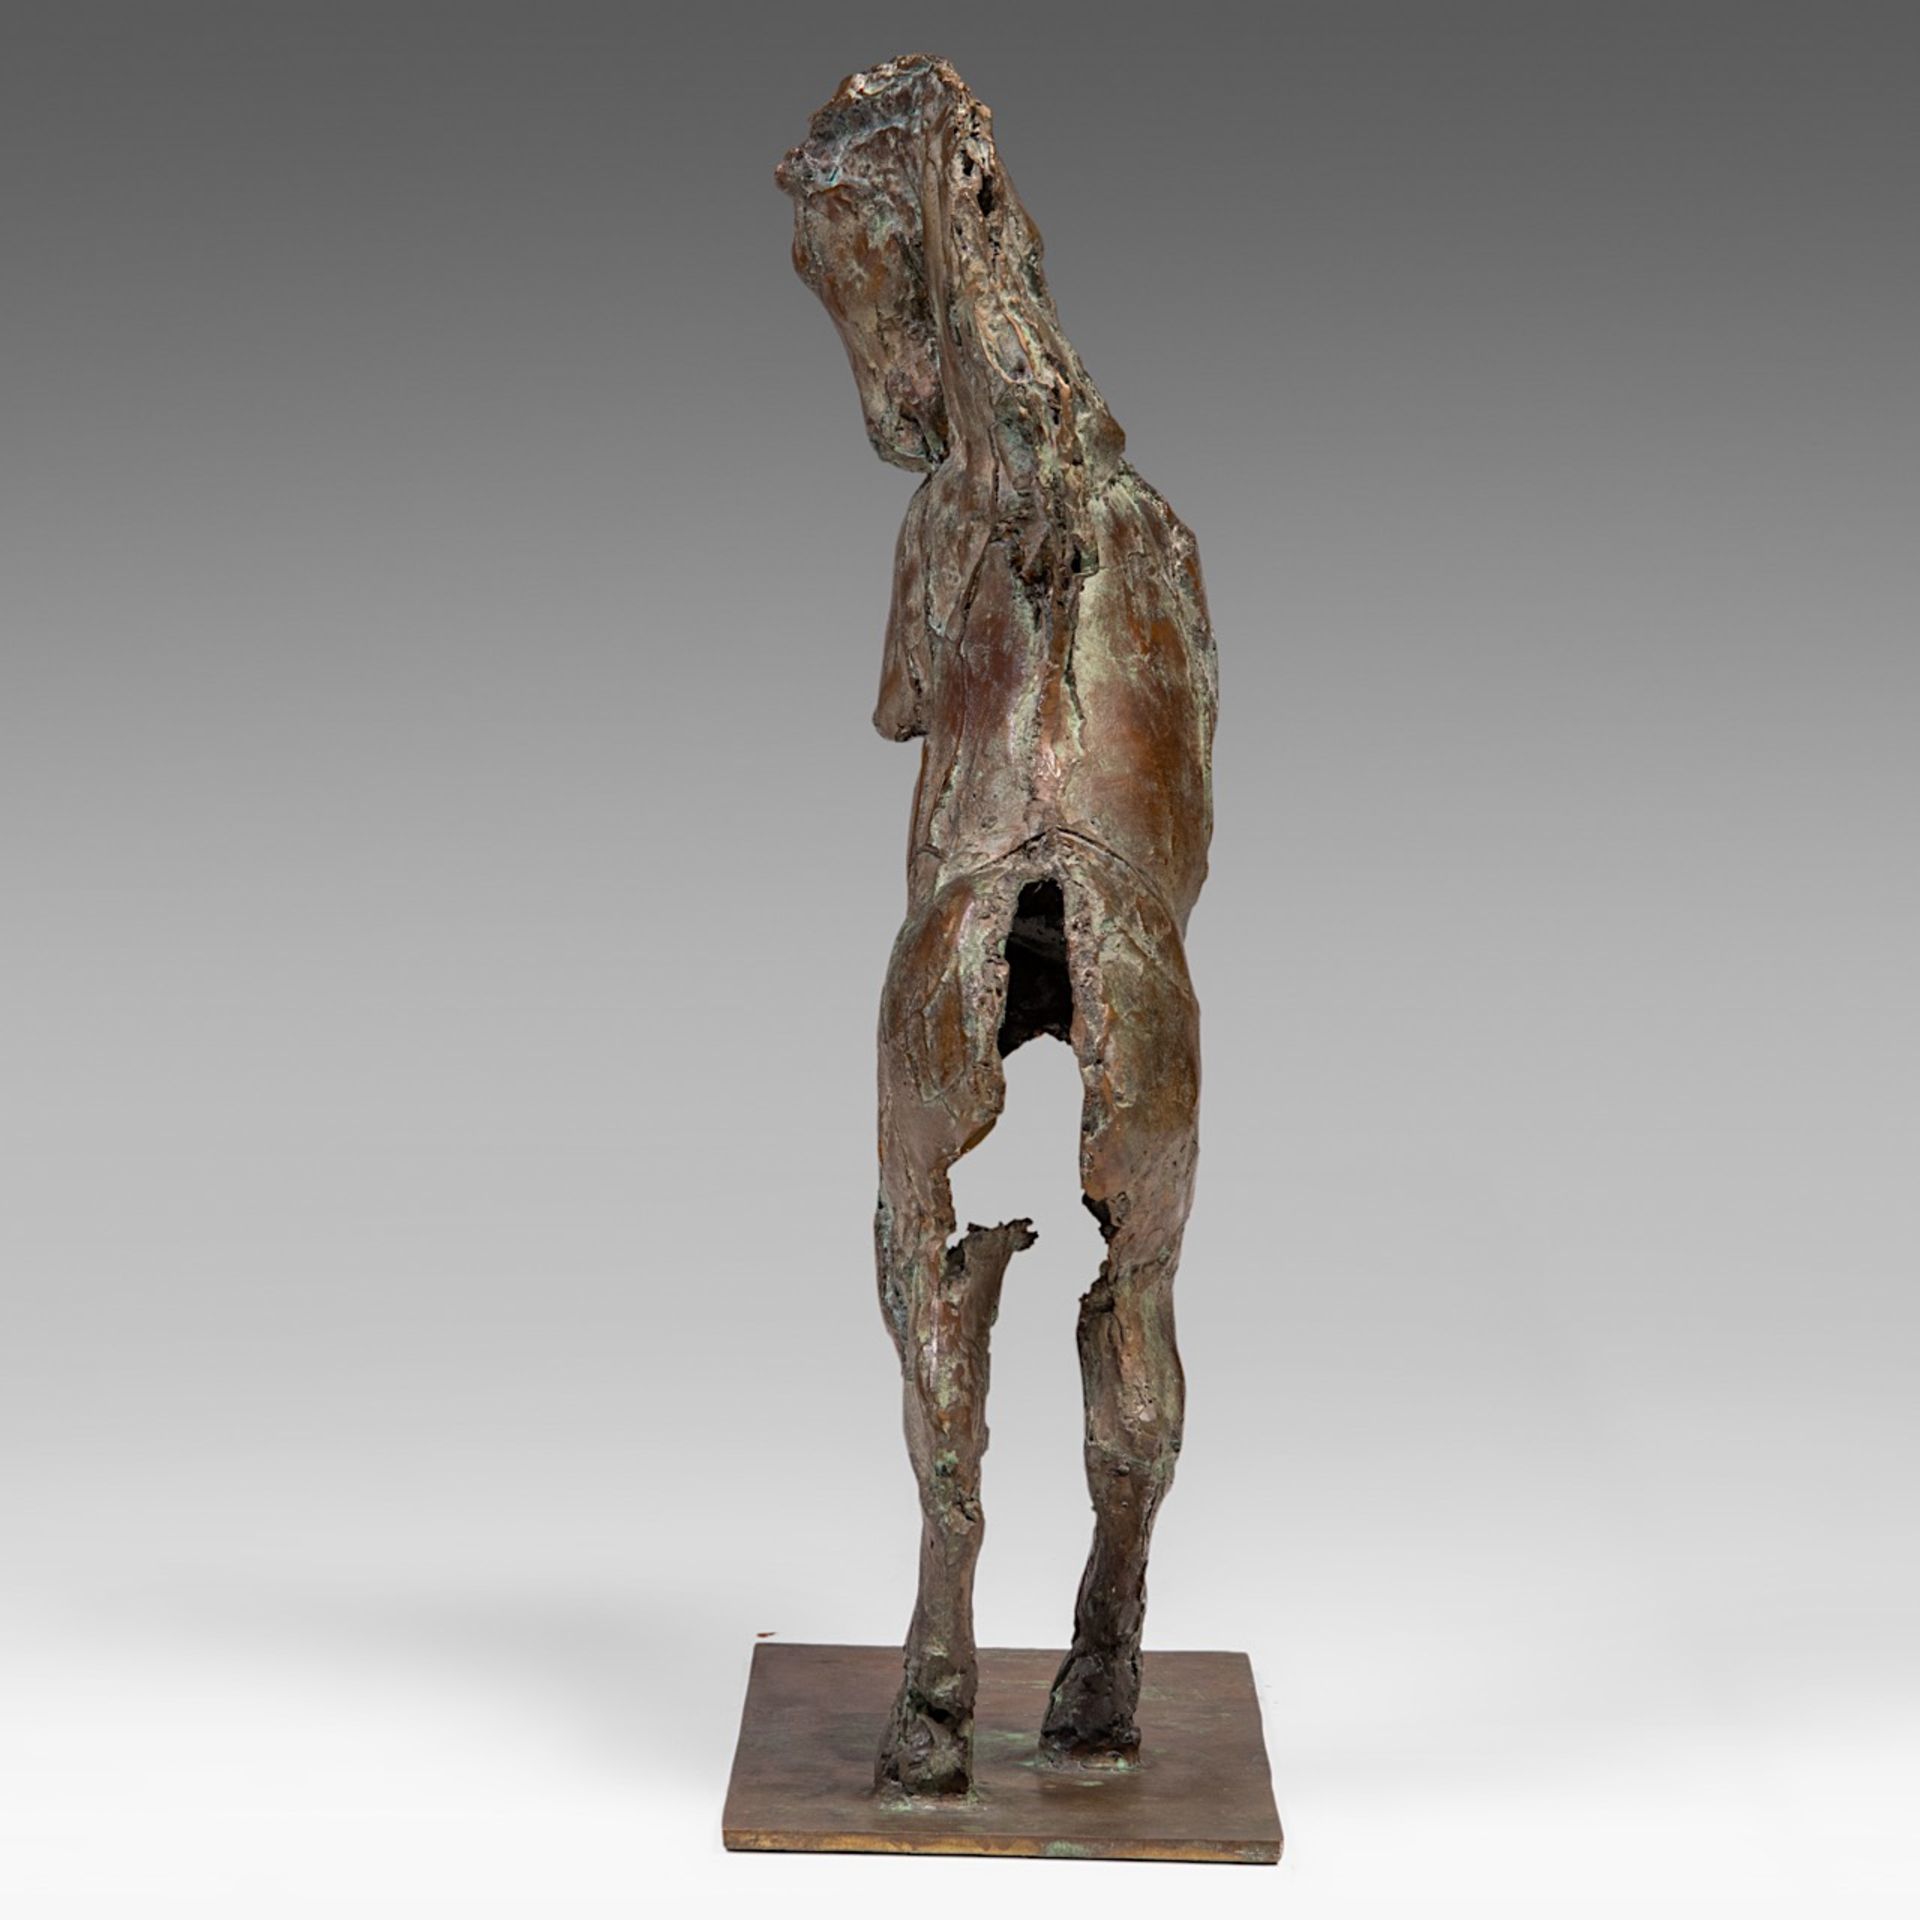 Jan Desmarets (1961), rearing horse, patinated bronze, 4/8 76 x 44.5 cm. (29.9 x 17.5 in.) - Image 3 of 7